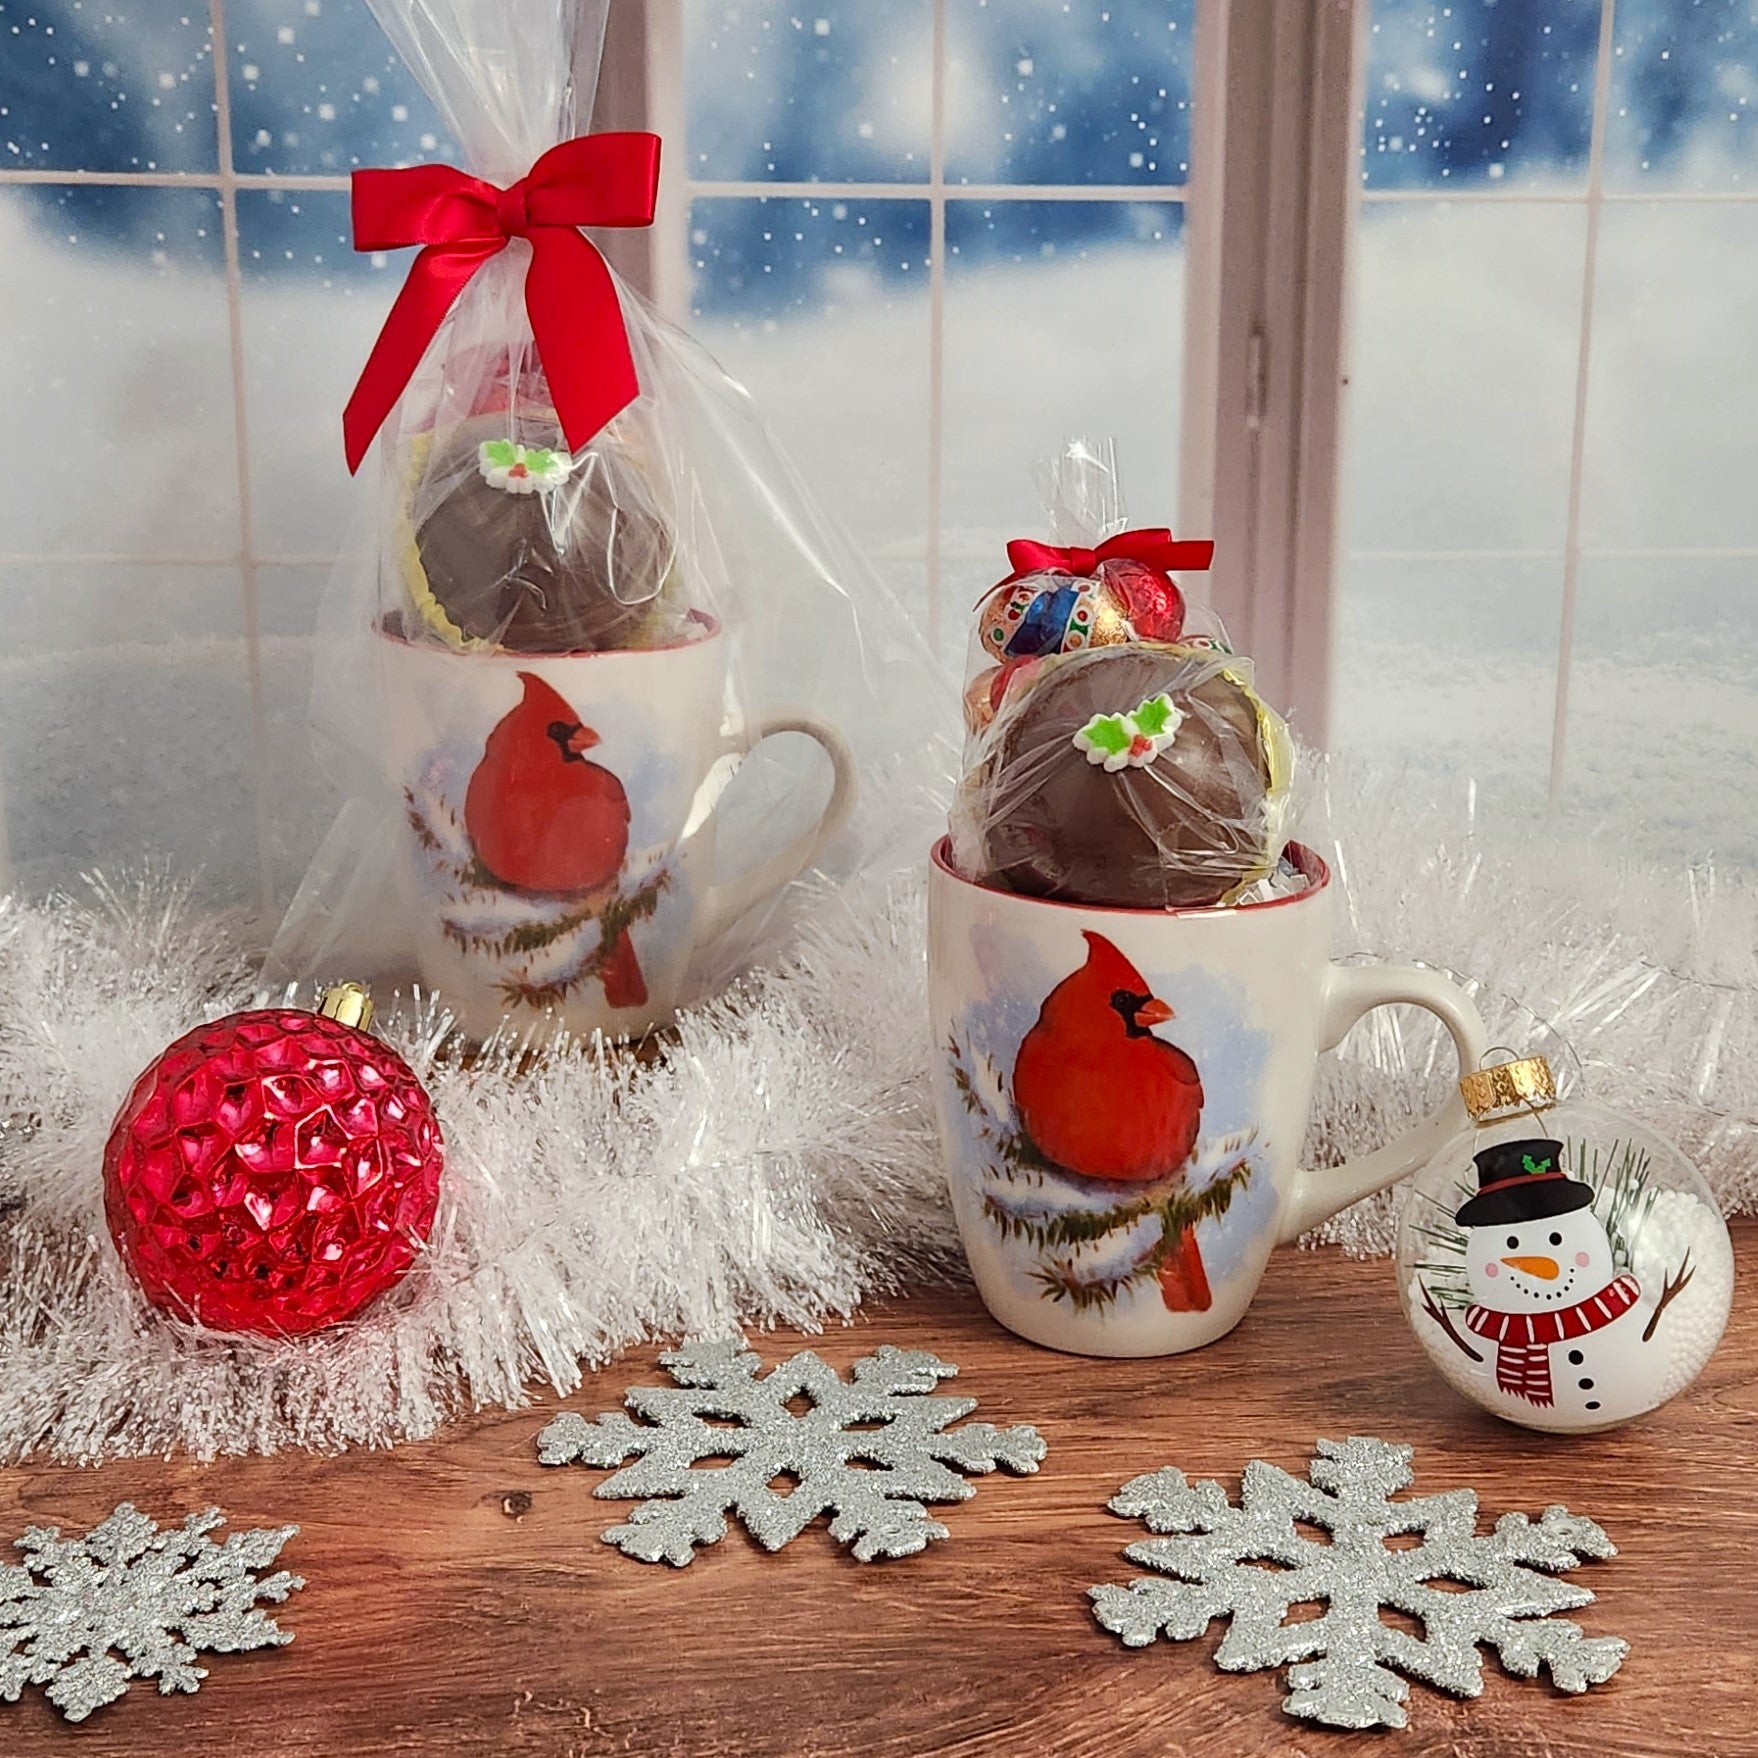 The Cardinal on Winter Branch Gift Mug from Stage Stop Candy includes 4 oz. of milk chocolate foiled ornaments and a Hot Cocoa Bomb - Ideal for a cozy winter evening by the fire, beautifully wrapped and ready to spread Holiday cheer!